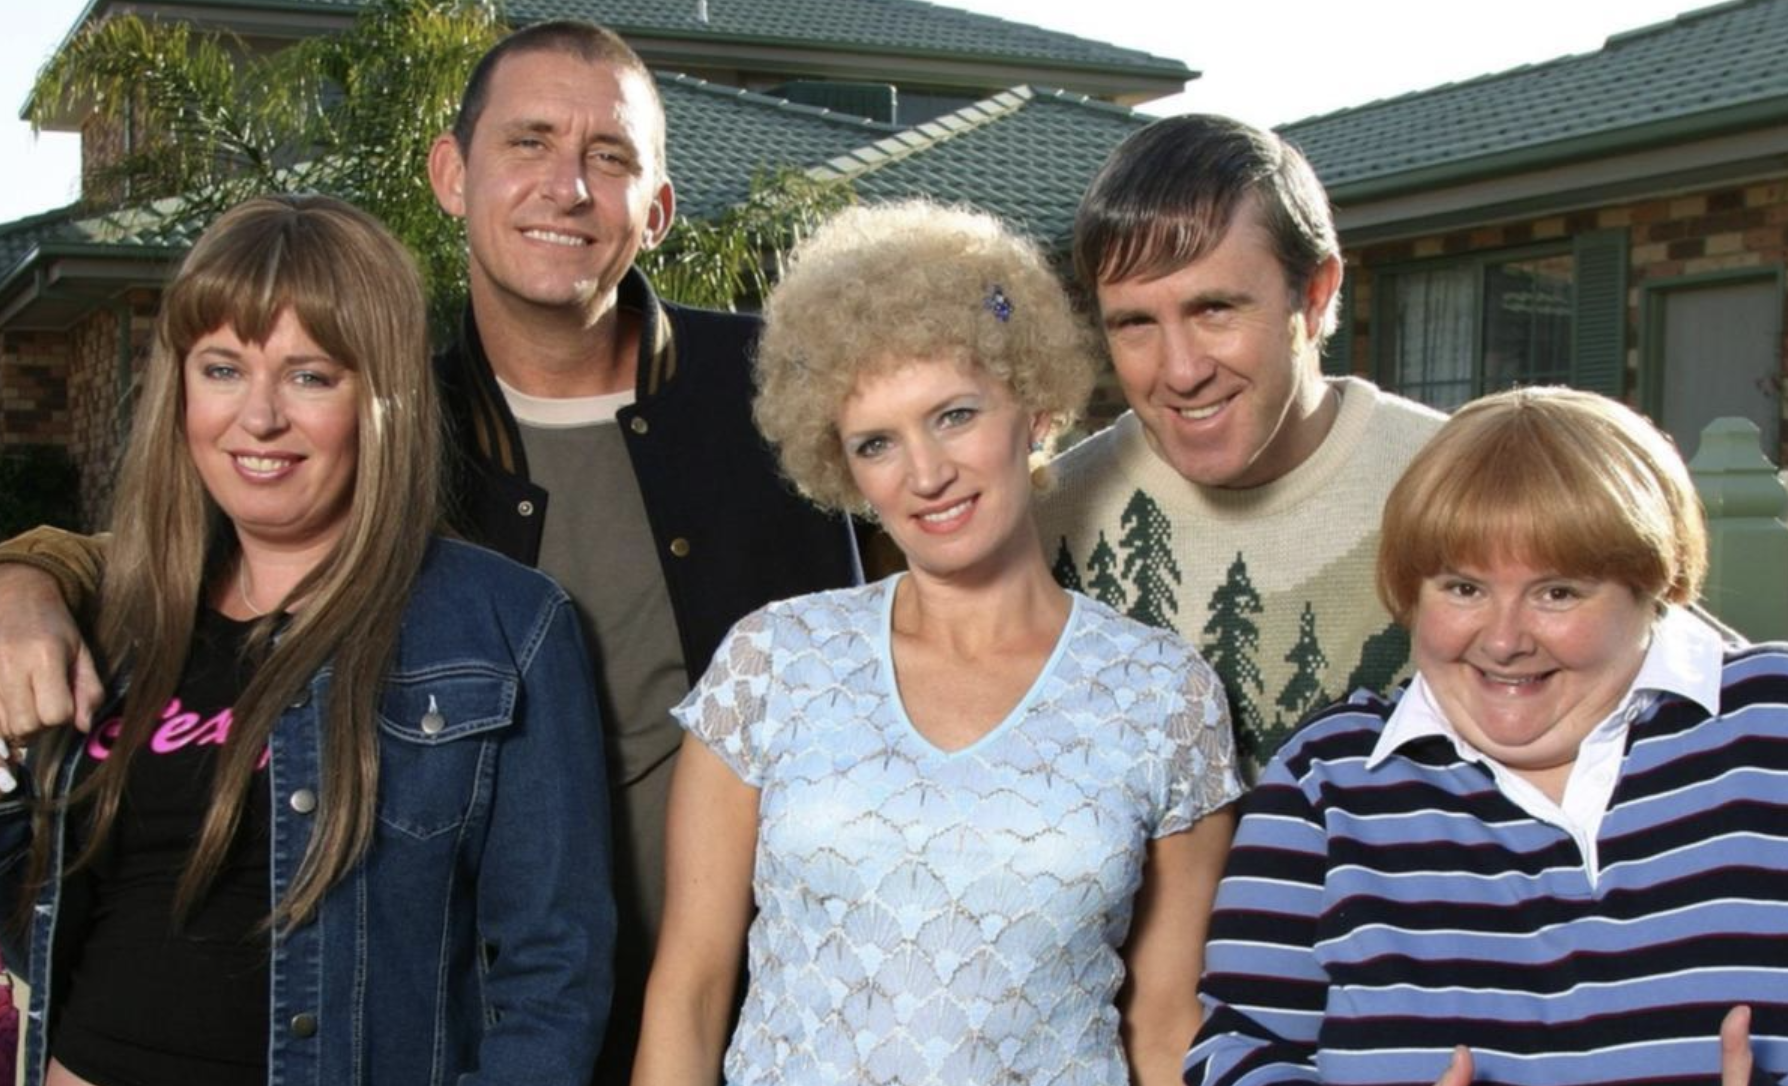 The Iconic Kath & Kim House Is Being Demolished & Which Fewl Agreed To This Monstrosity?